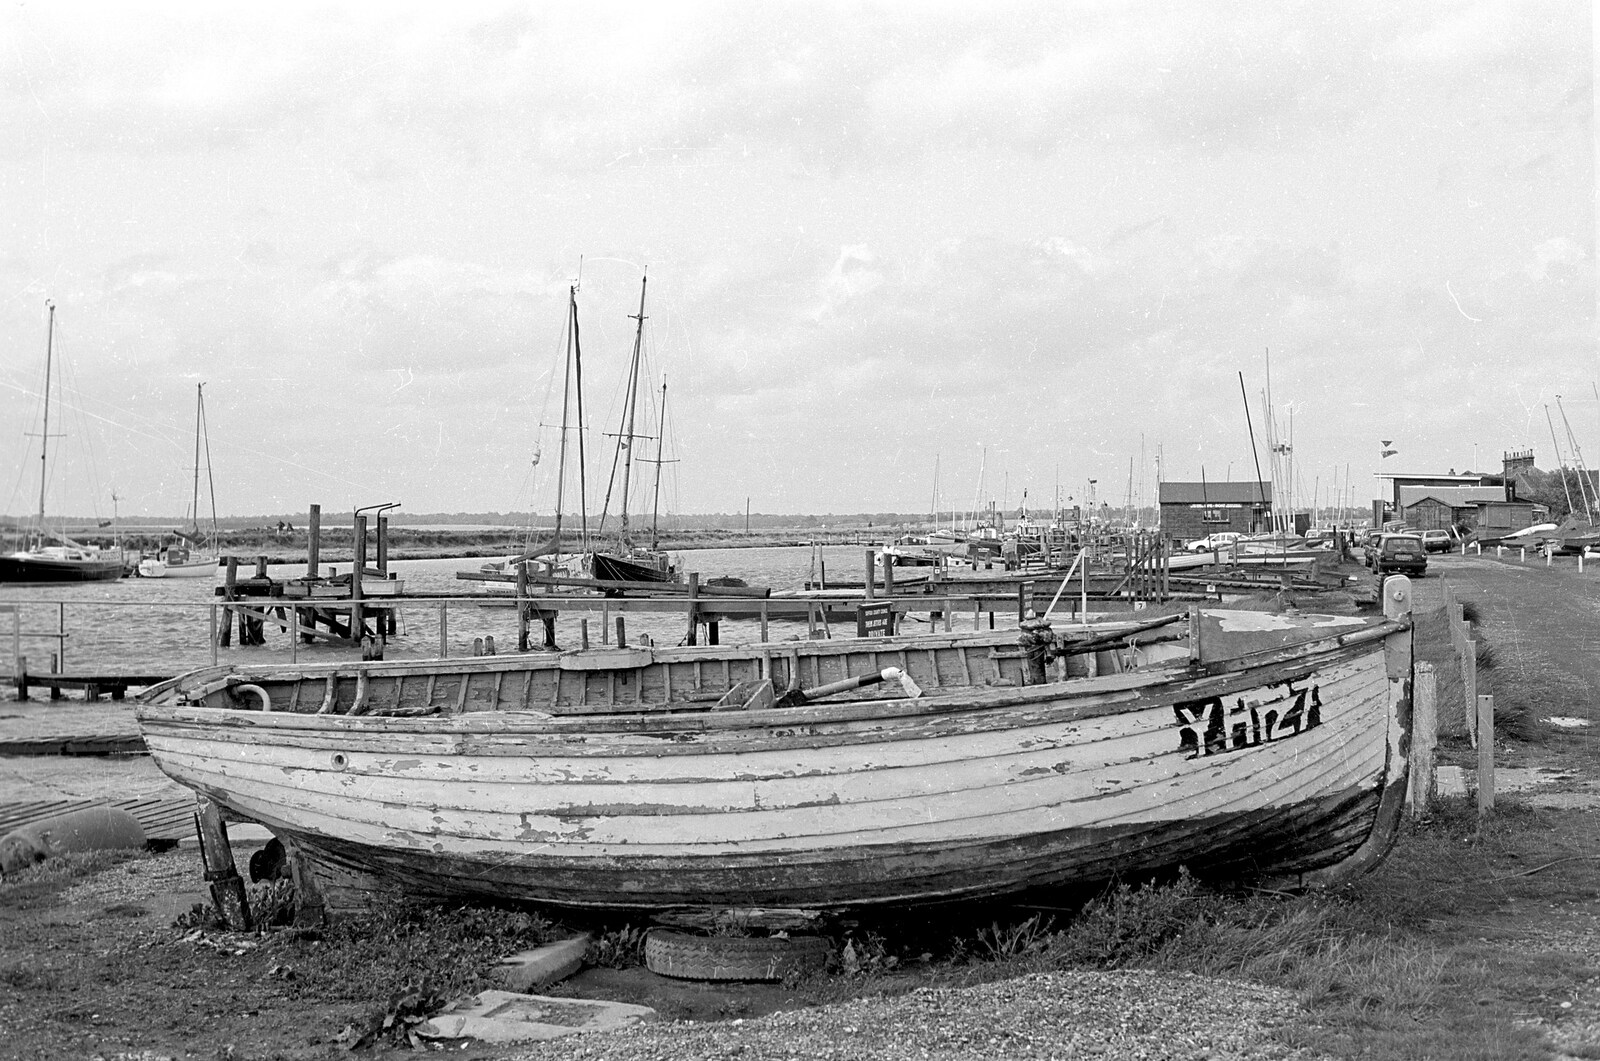 The decaying skeleton of a fishing boat from Blackshore Quay in Black and White, Southwold and Sizewell, Suffolk - 16th September 1992